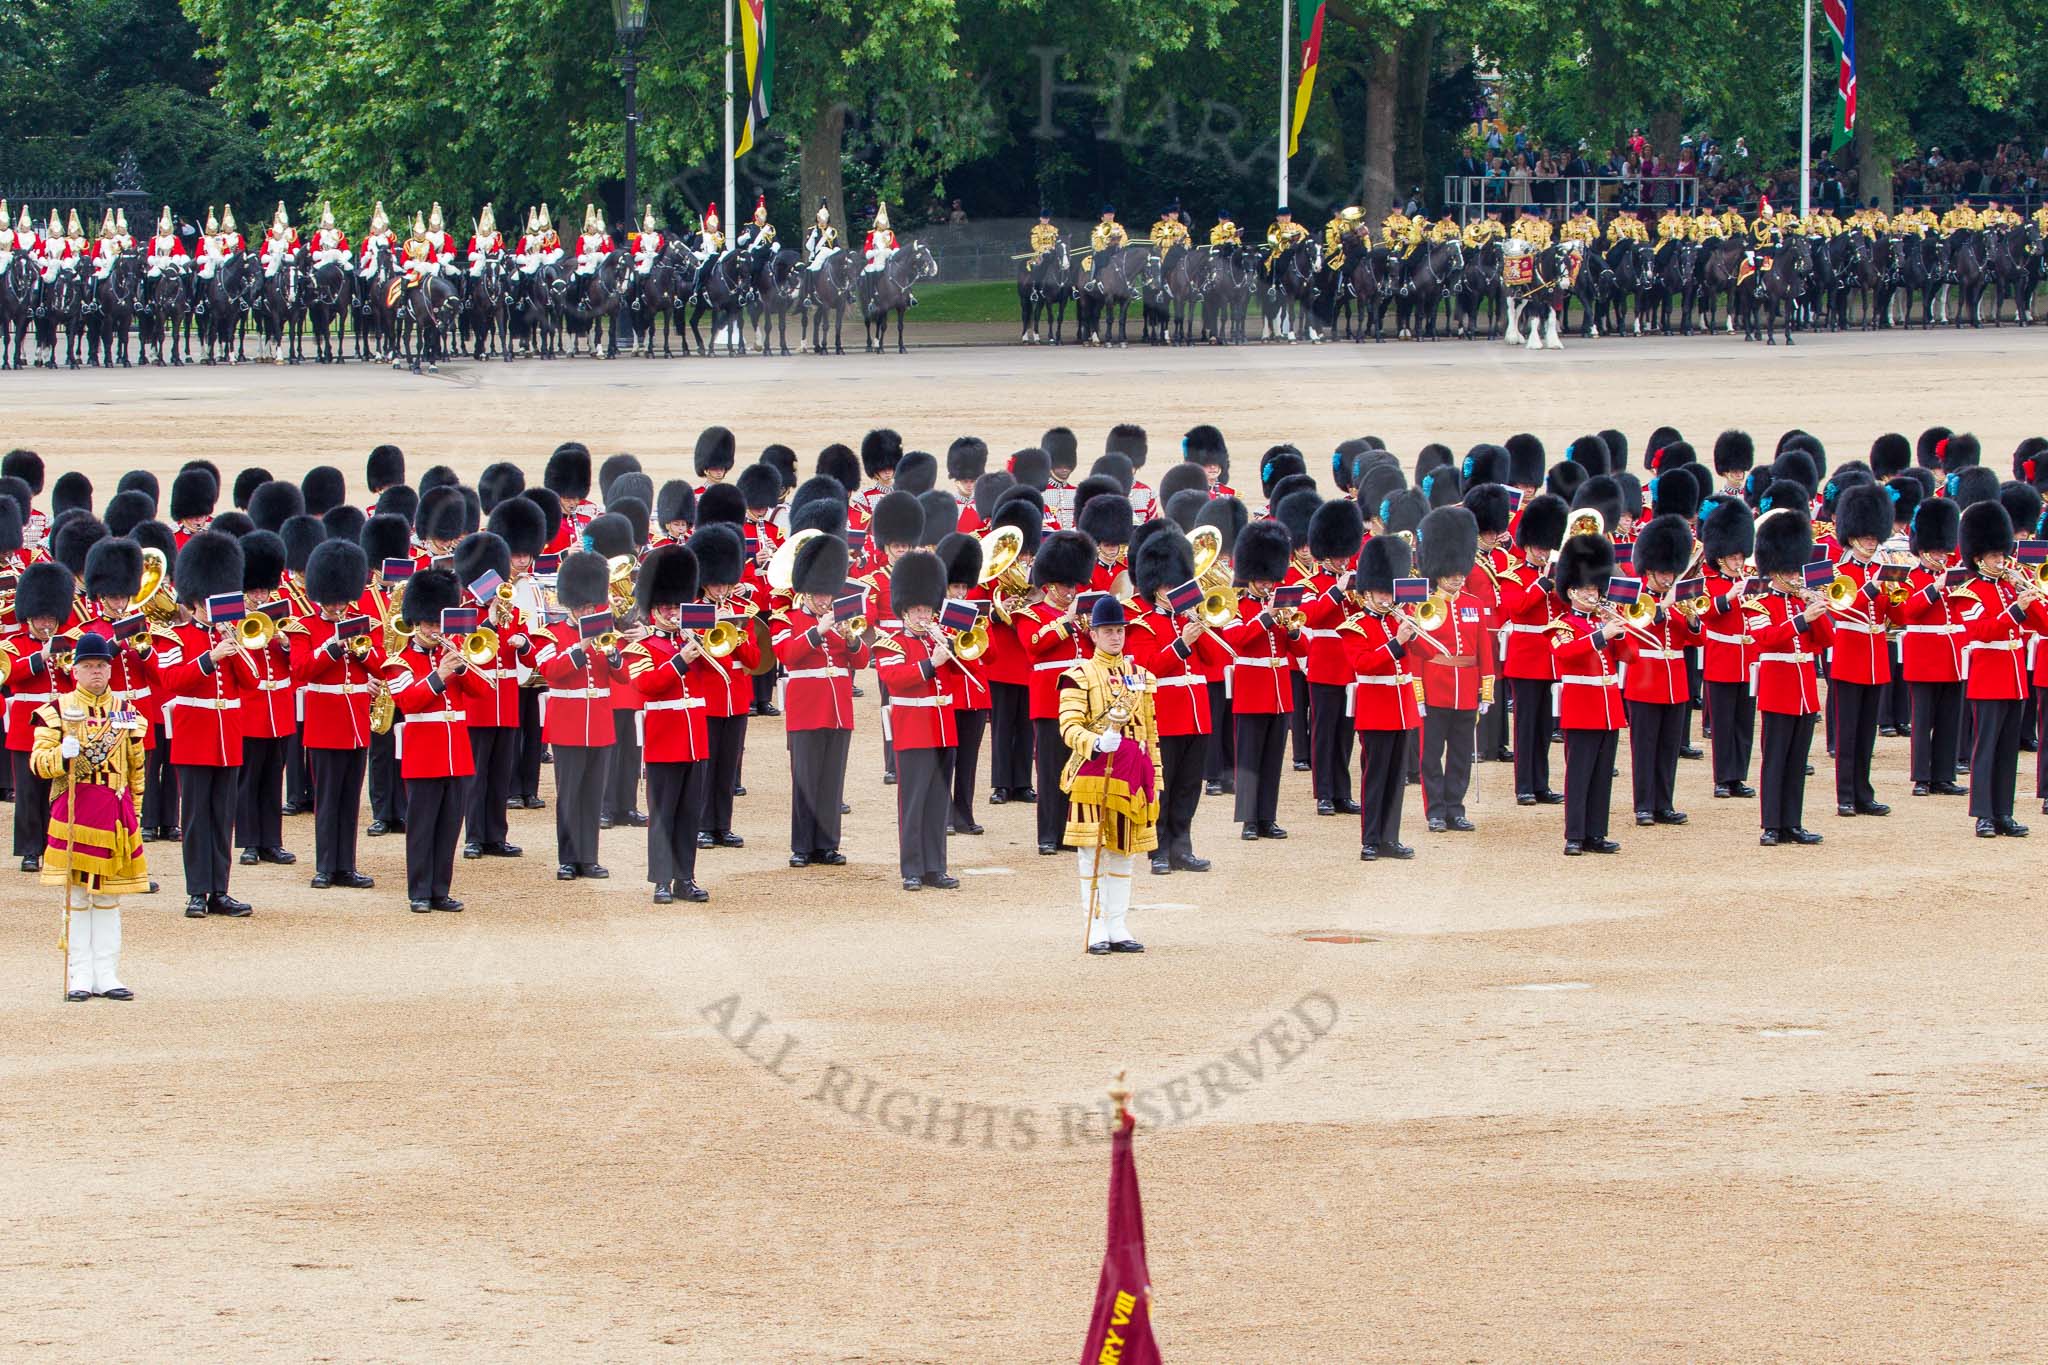 Trooping the Colour 2014.
Horse Guards Parade, Westminster,
London SW1A,

United Kingdom,
on 14 June 2014 at 11:45, image #681